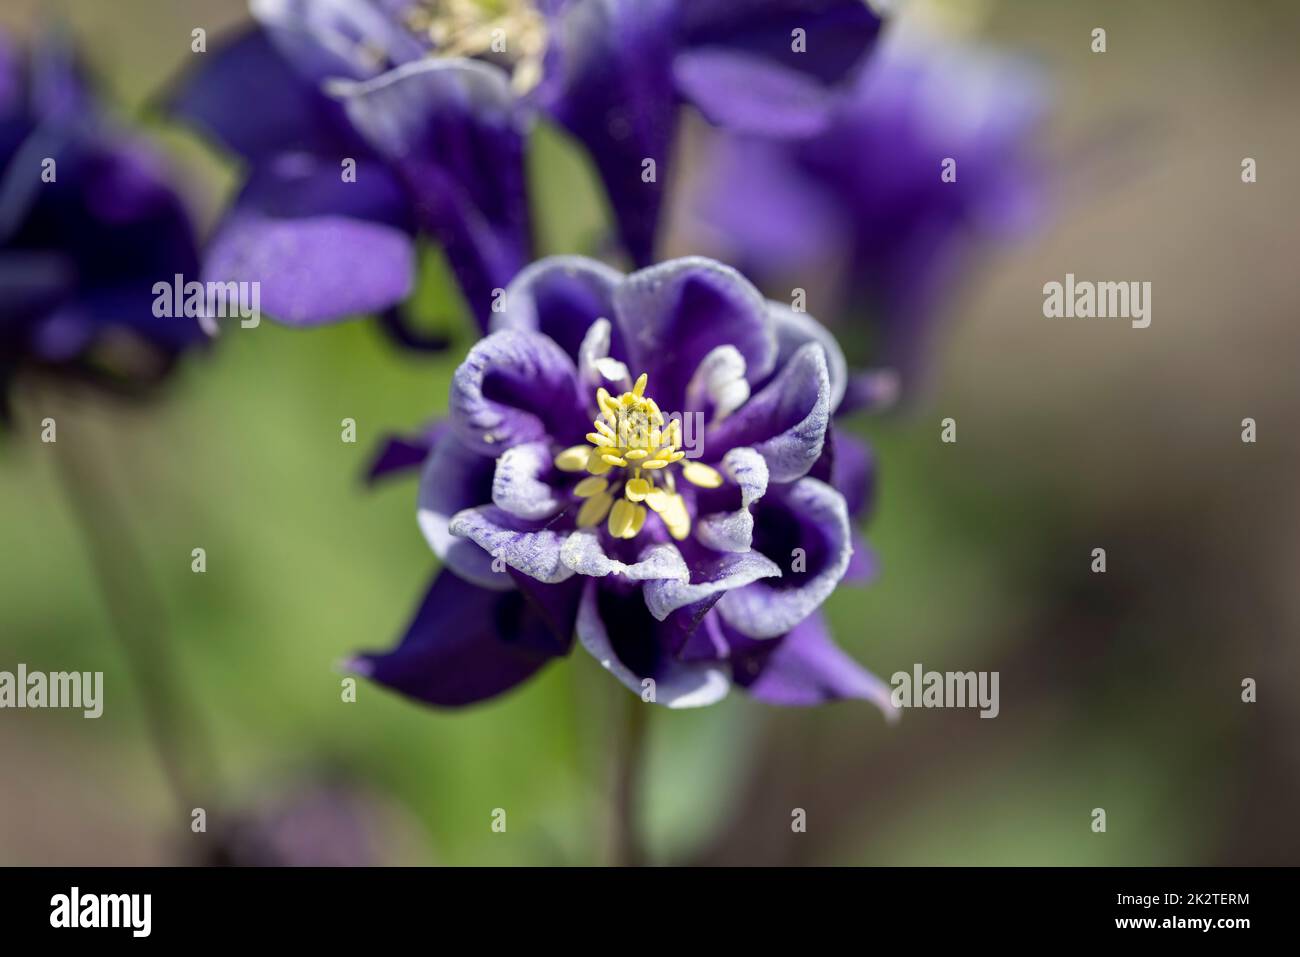 Beautiful flower of violet color Aquilegia vulgaris blooming in the garden, close up Stock Photo